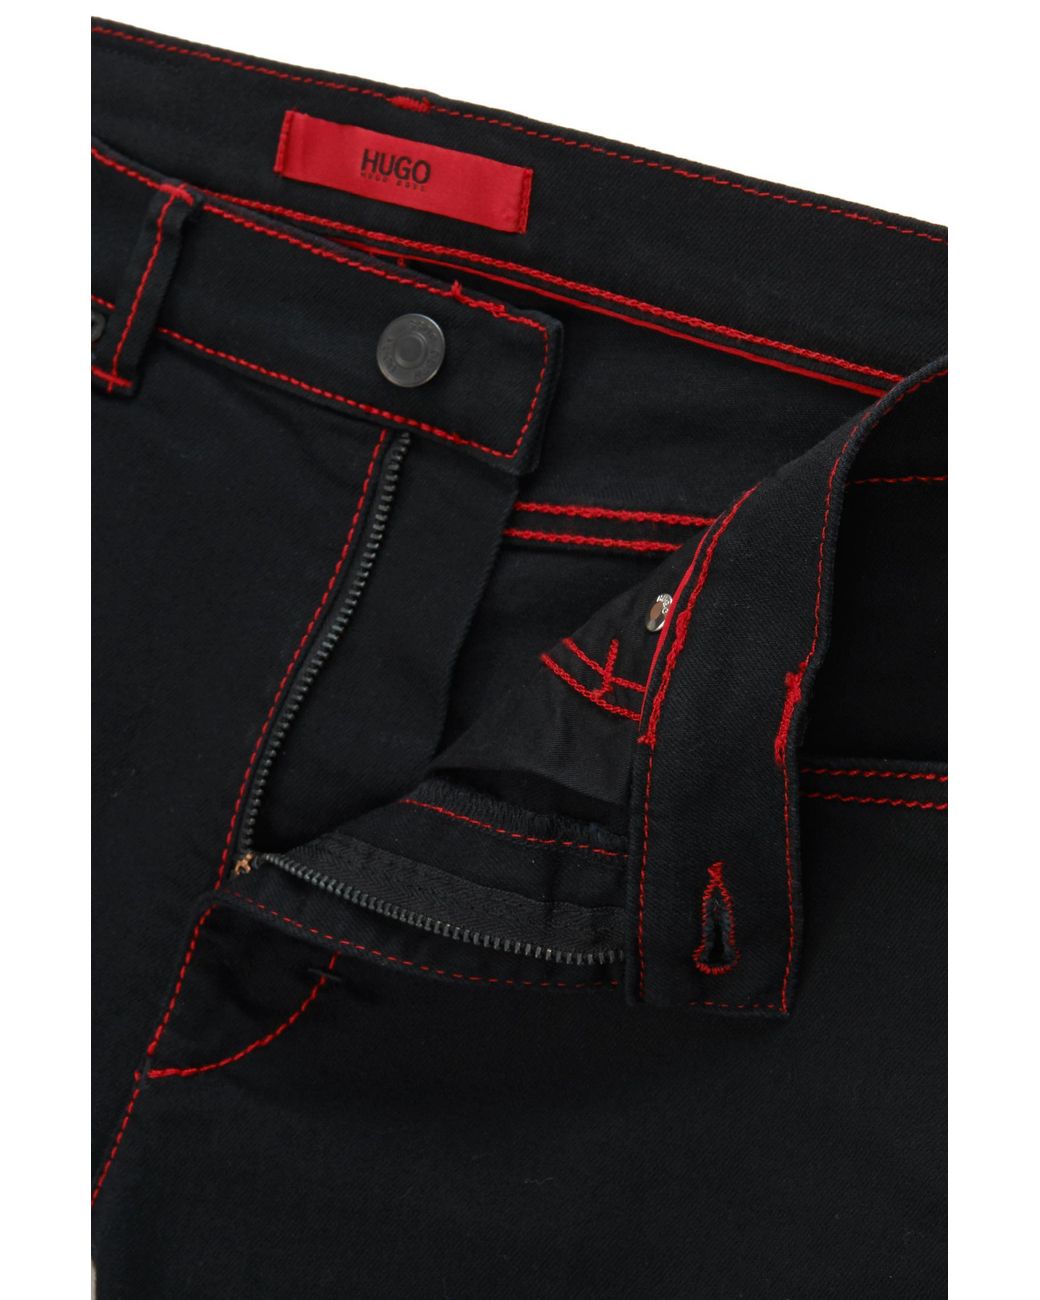 HUGO Skinny-fit Jeans With Red Stitching in Black for Men | Lyst Canada